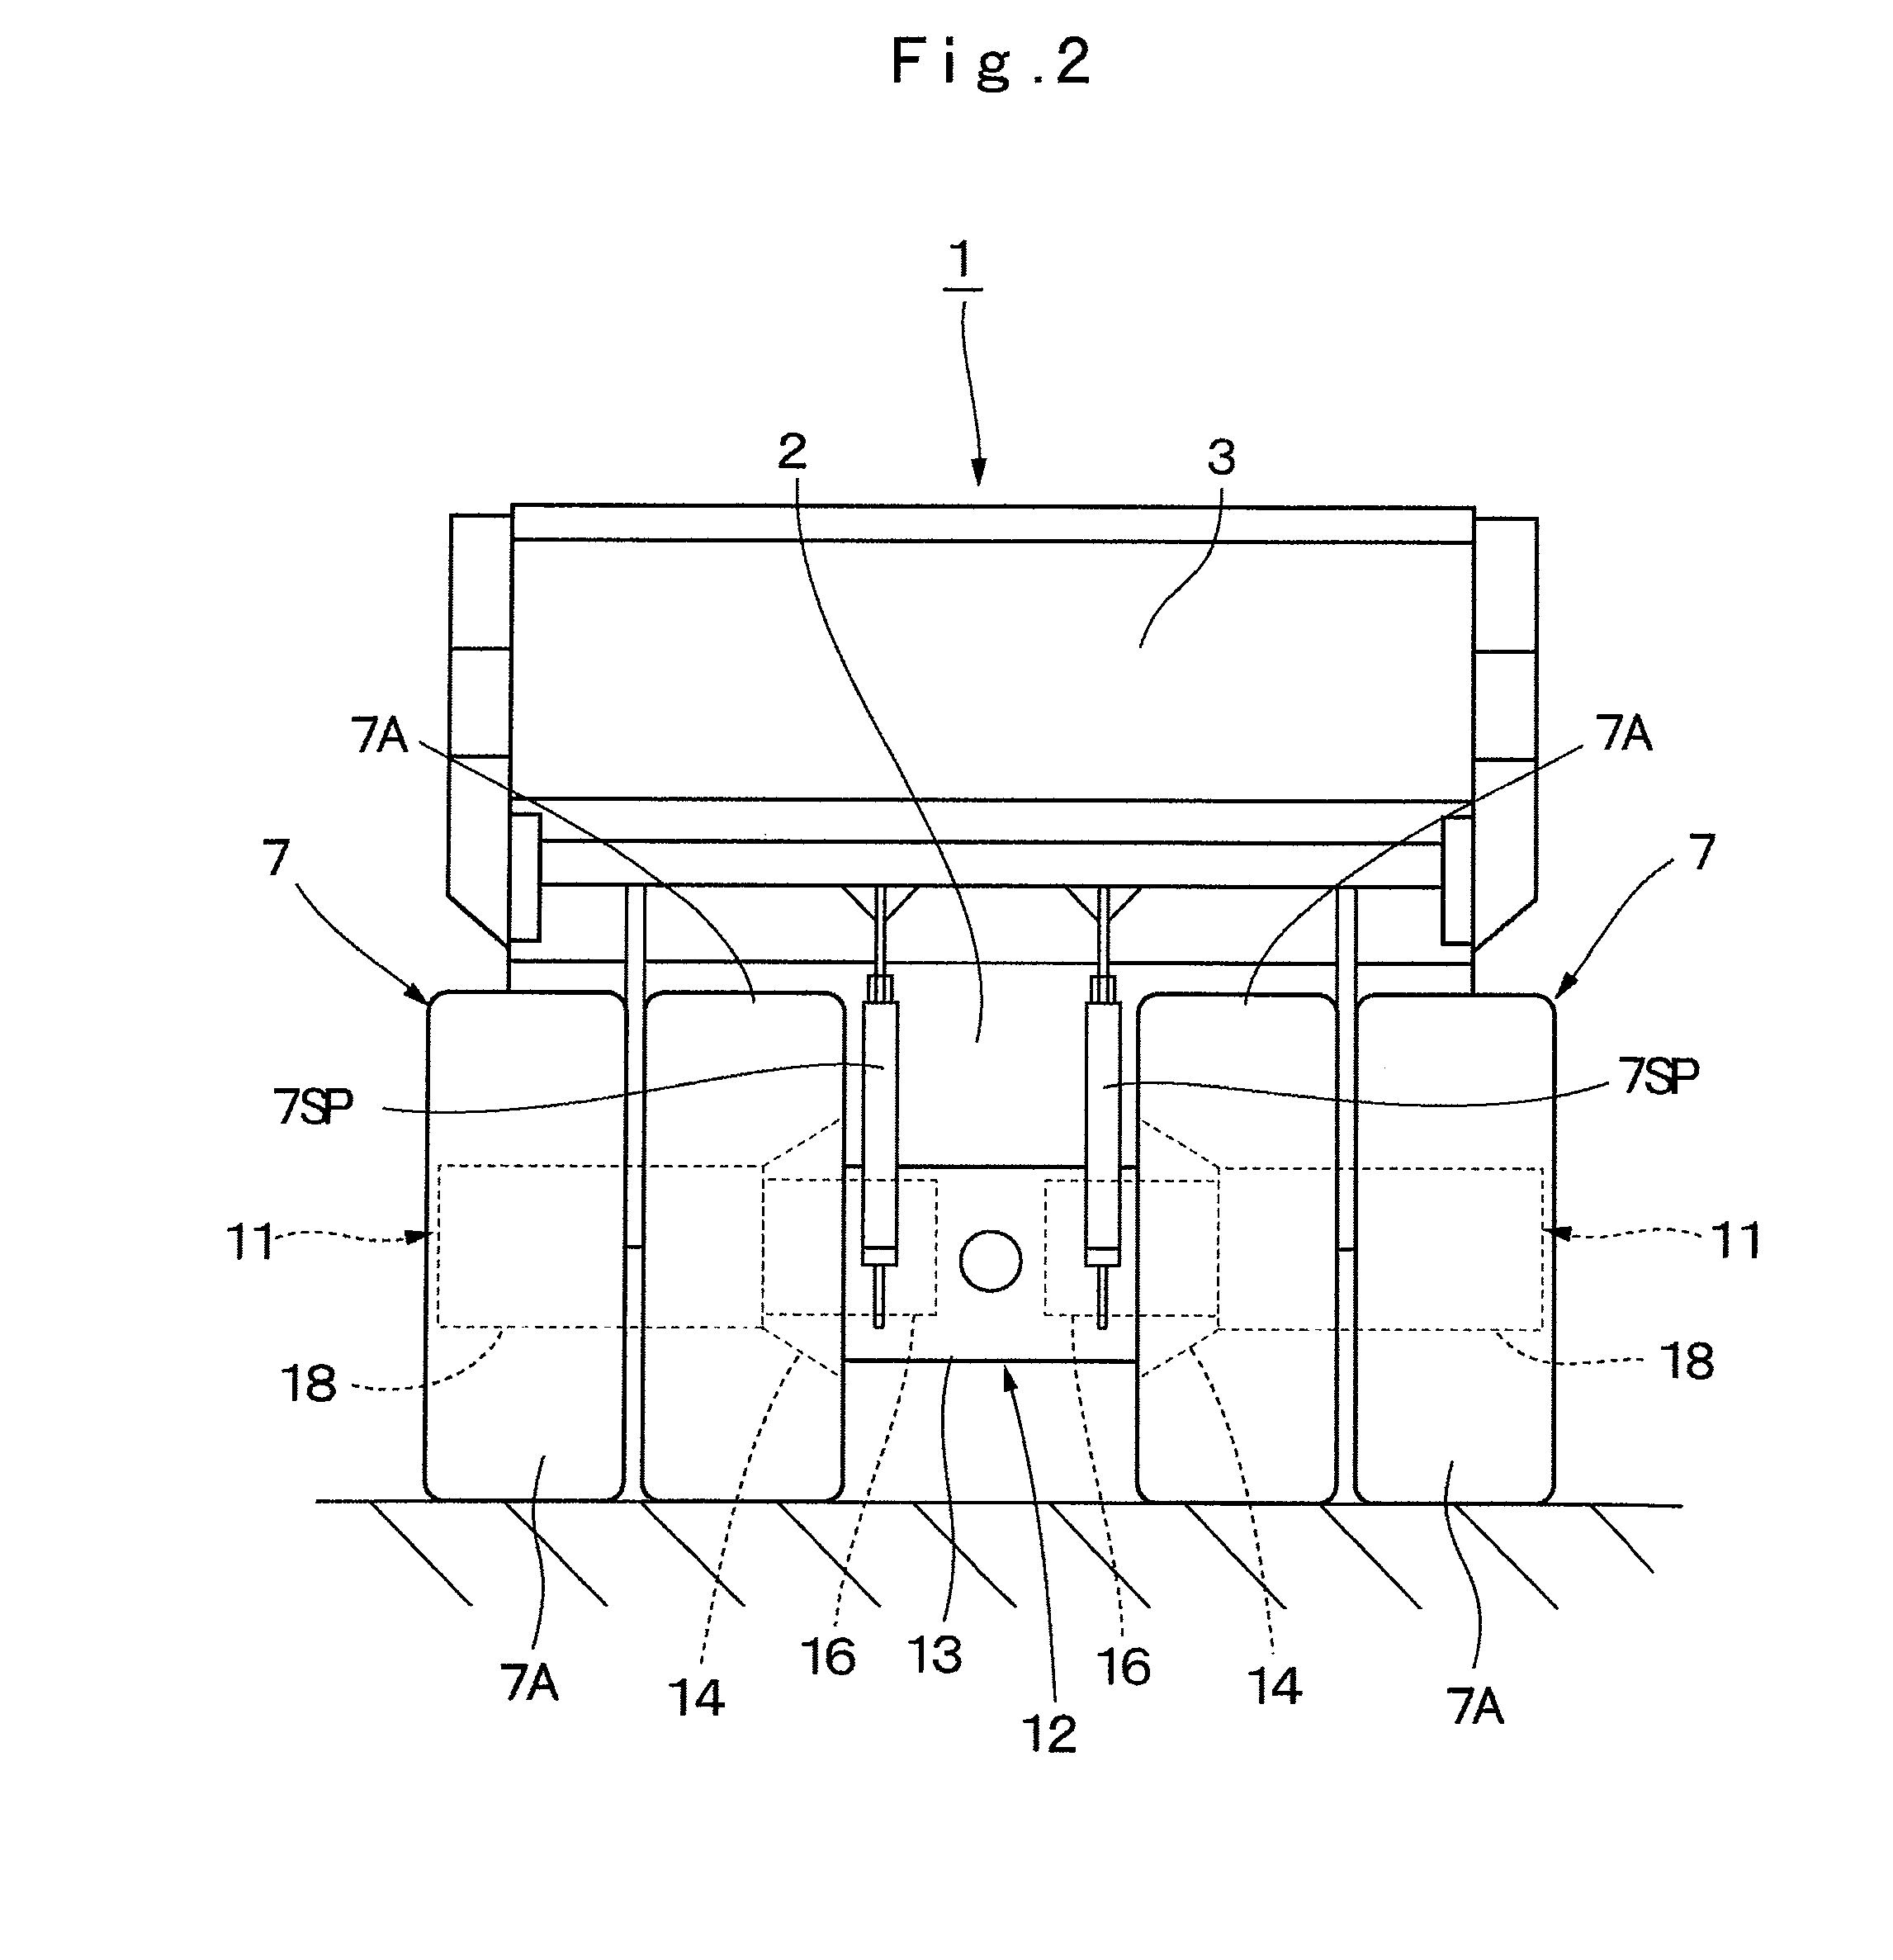 Travel drive device for dump truck